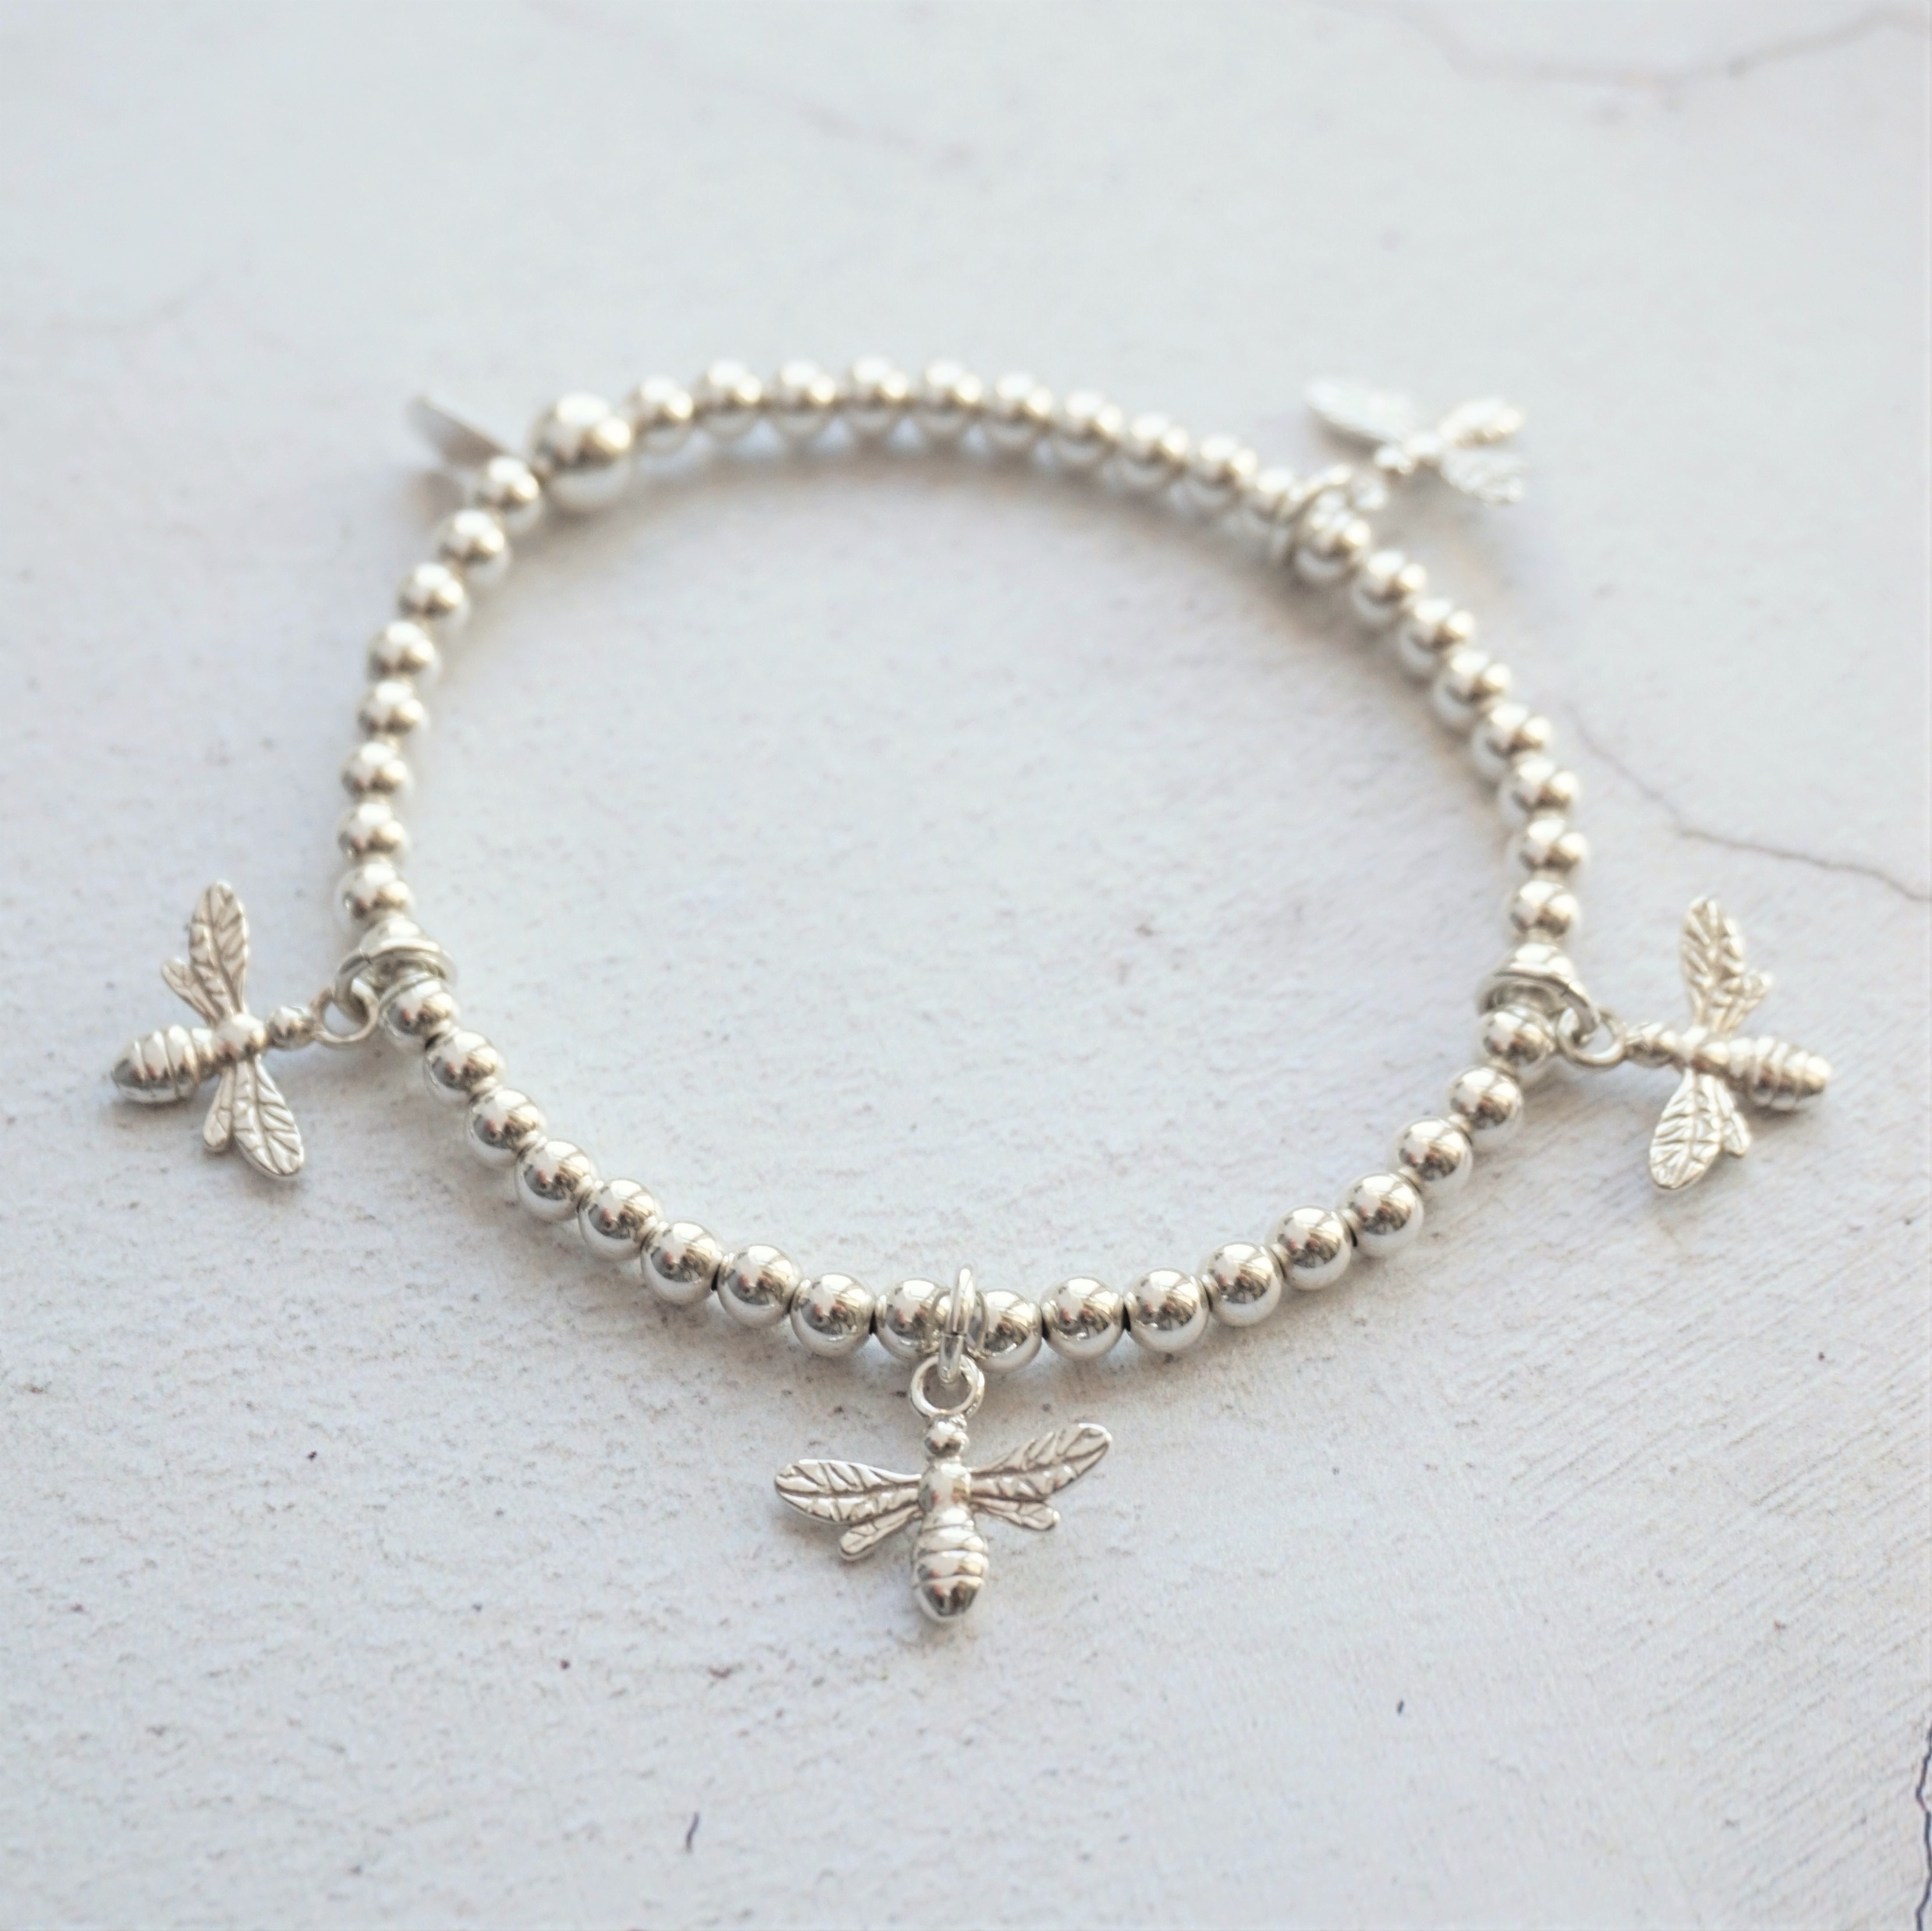 sterling silver bracelet with bumble bee charms